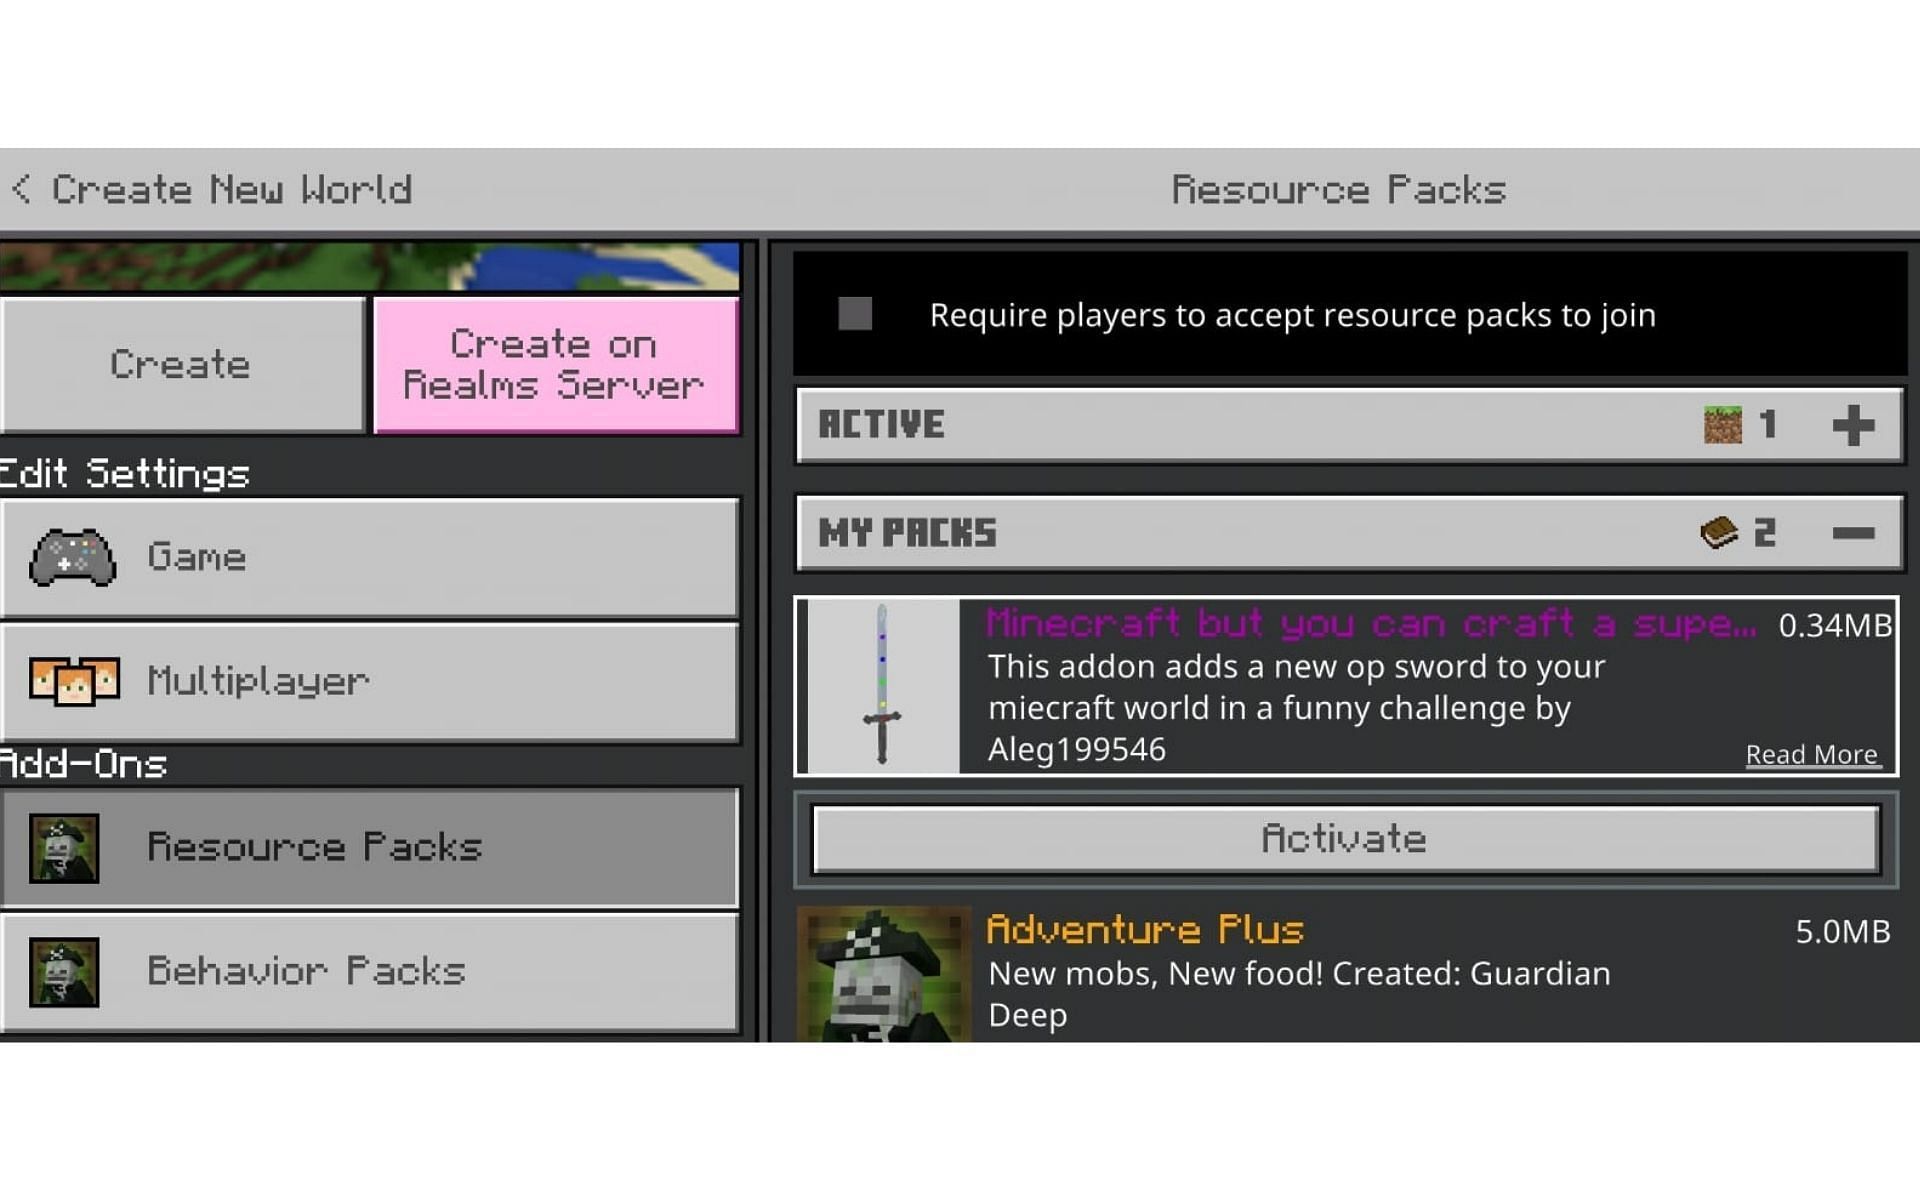 Activate both the Resource Pack and Behavior Pack (Image via Minecraft)